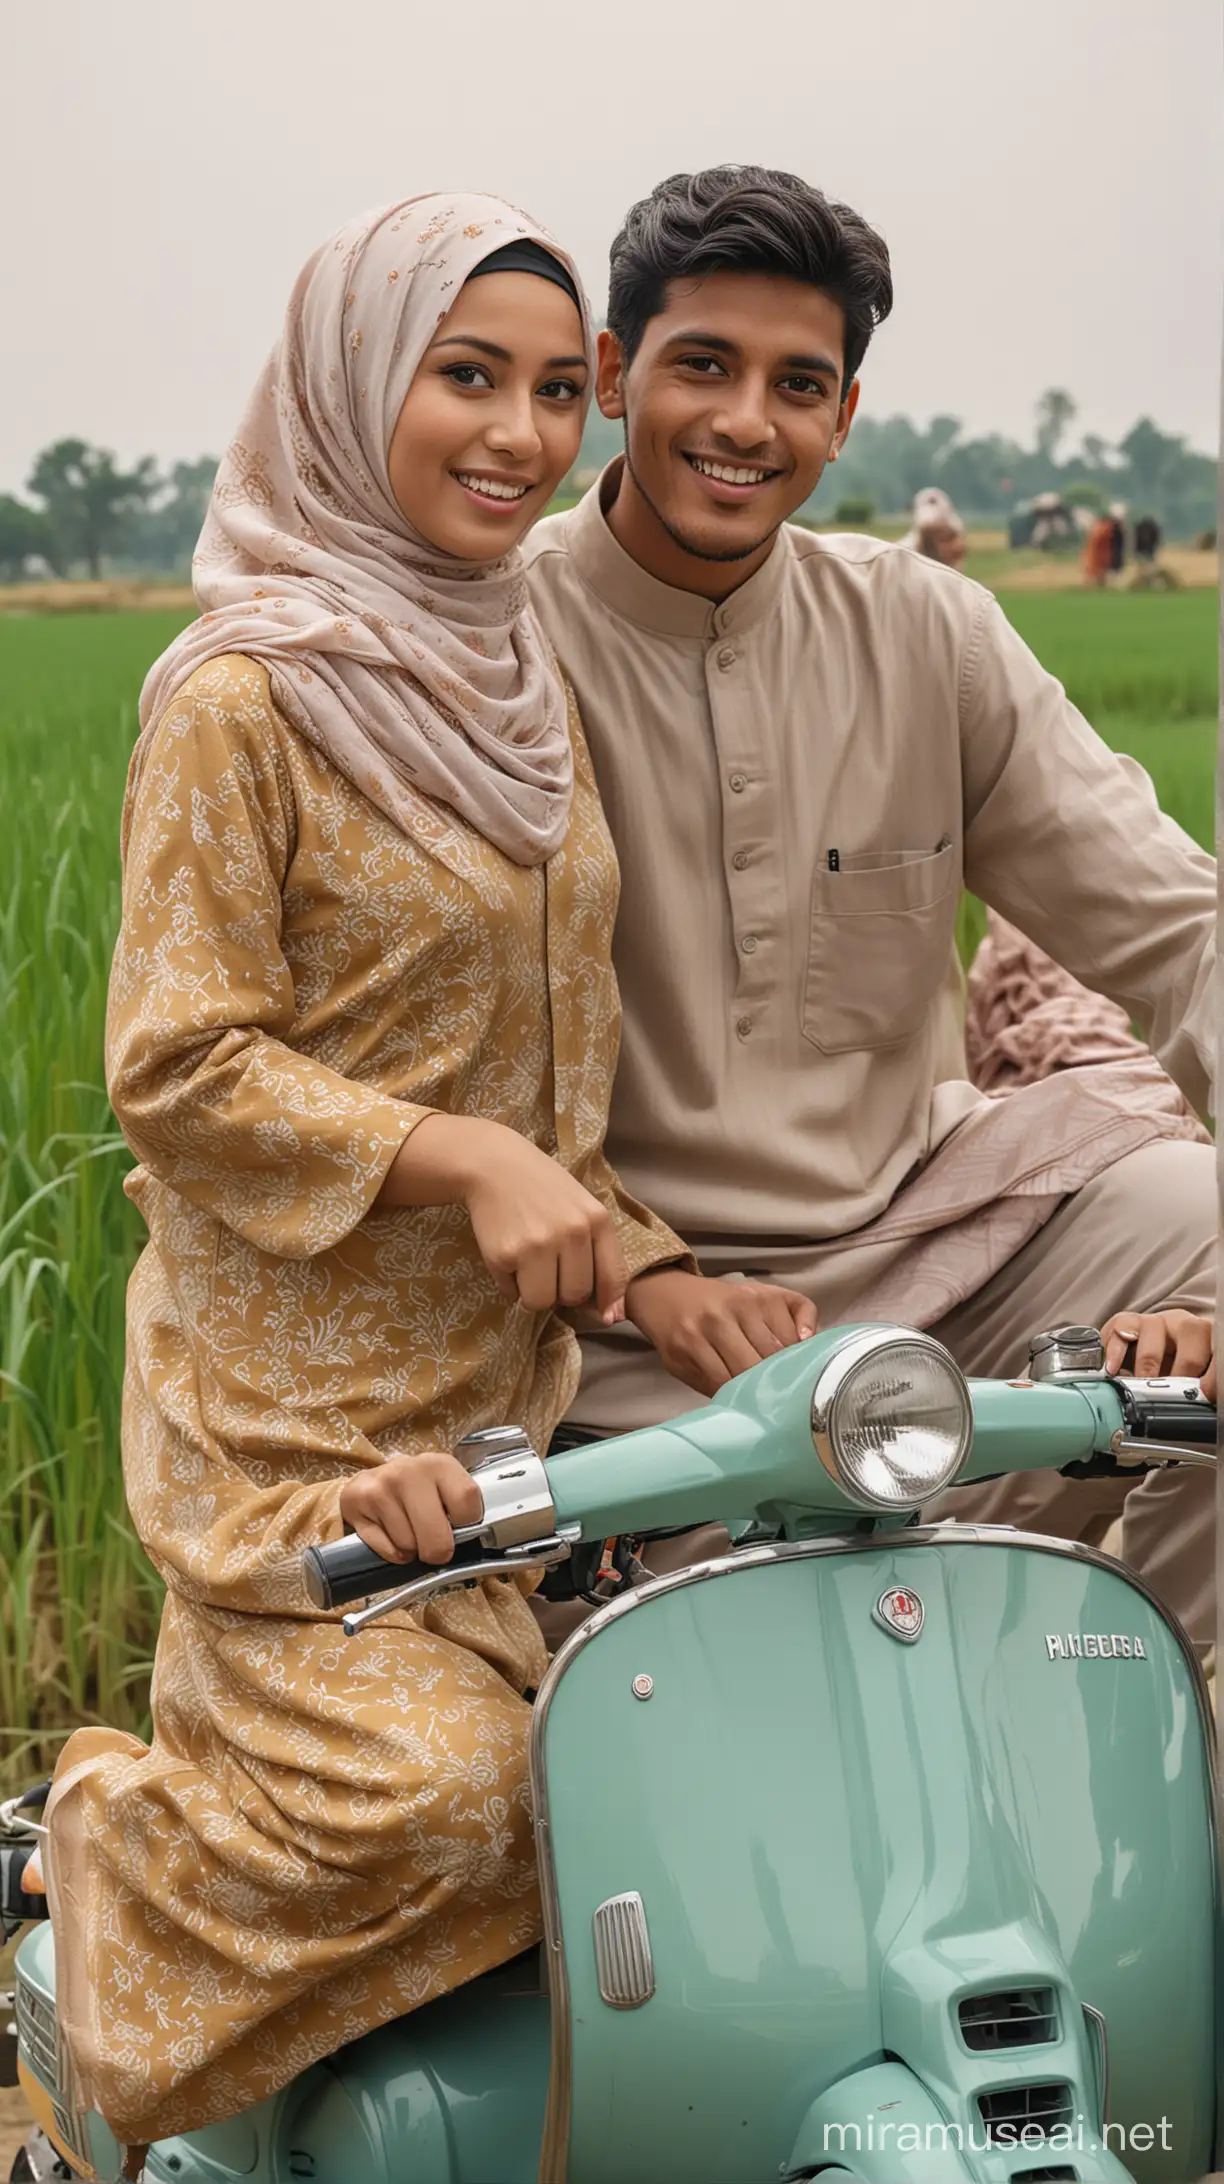 realistic, portrait pose facing the camera of a young man and young woman riding a Vespa motorbike.
both of them wear Muslim clothing, while the woman is a bit fat and wears a hijab.
rice field background.